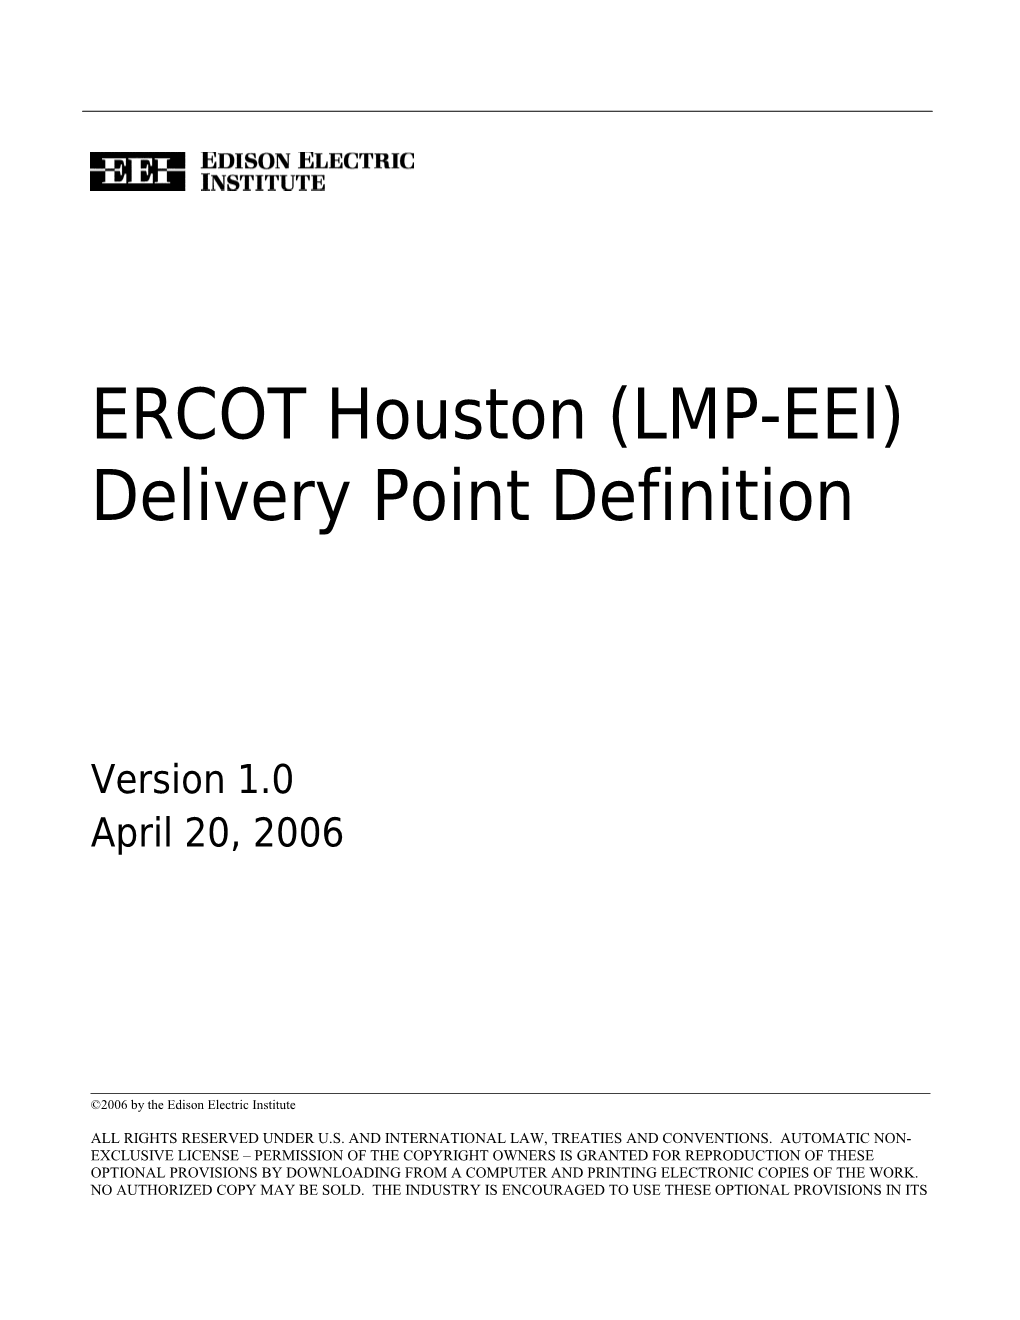 ERCOT Houston (LMP-EEI) Delivery Point Definition, Version 1.0, 4/20/061